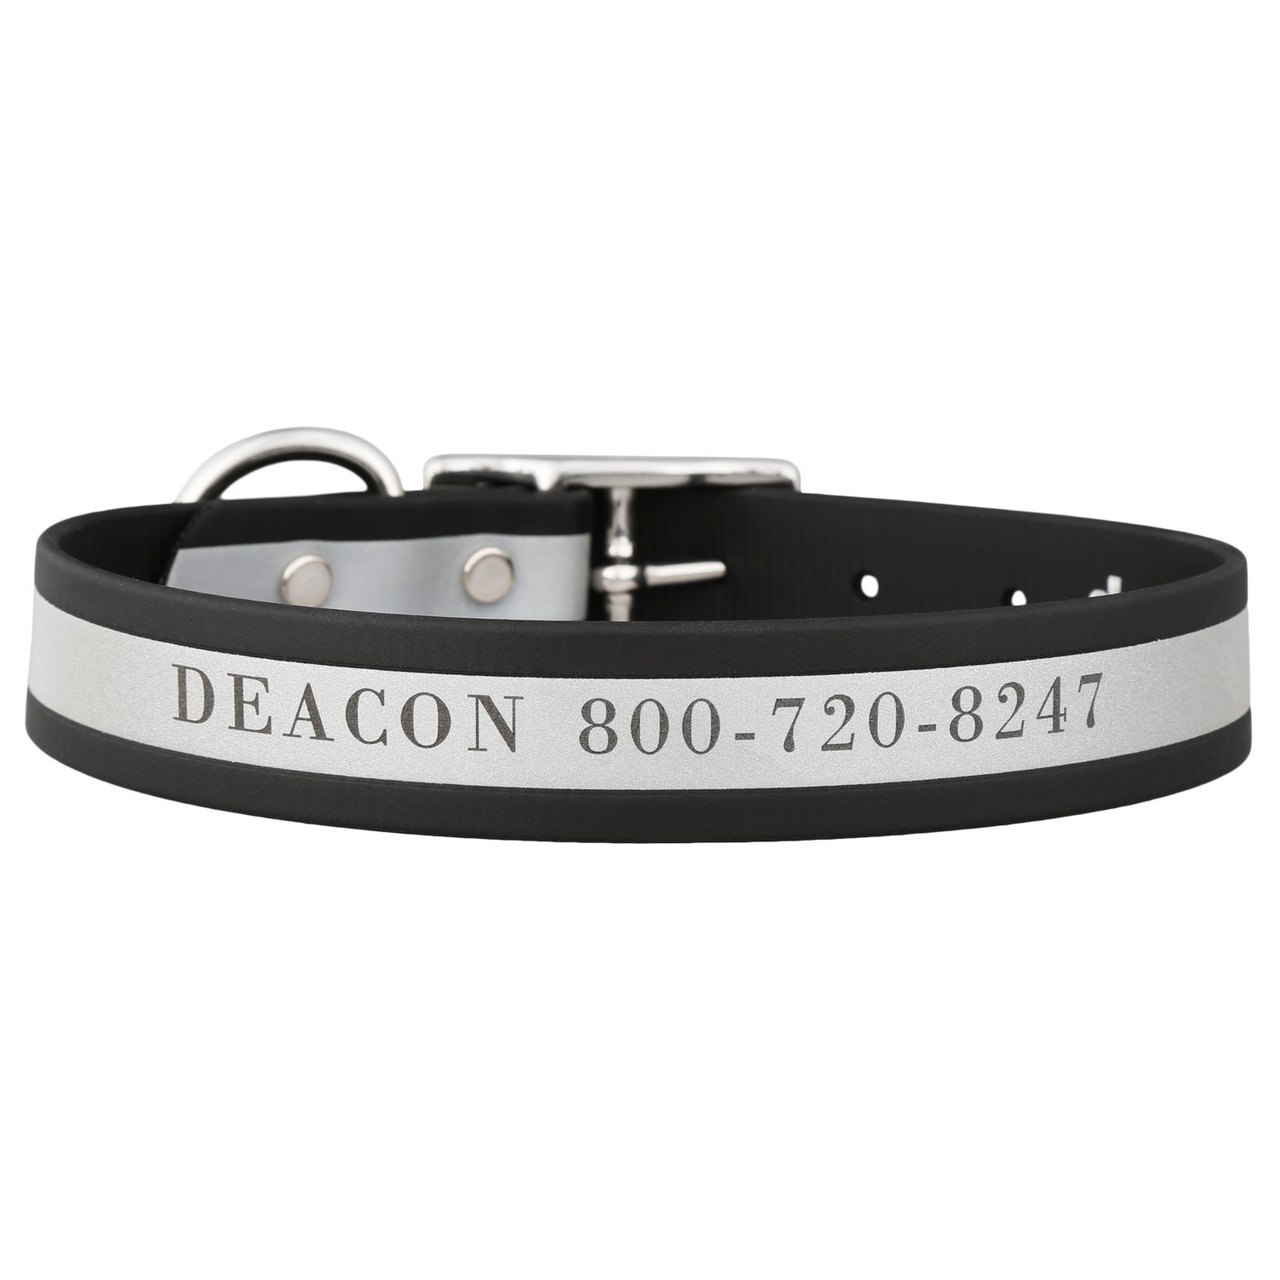 Waterproof Standard Collar with Personalized Reflective Strip | dogIDs